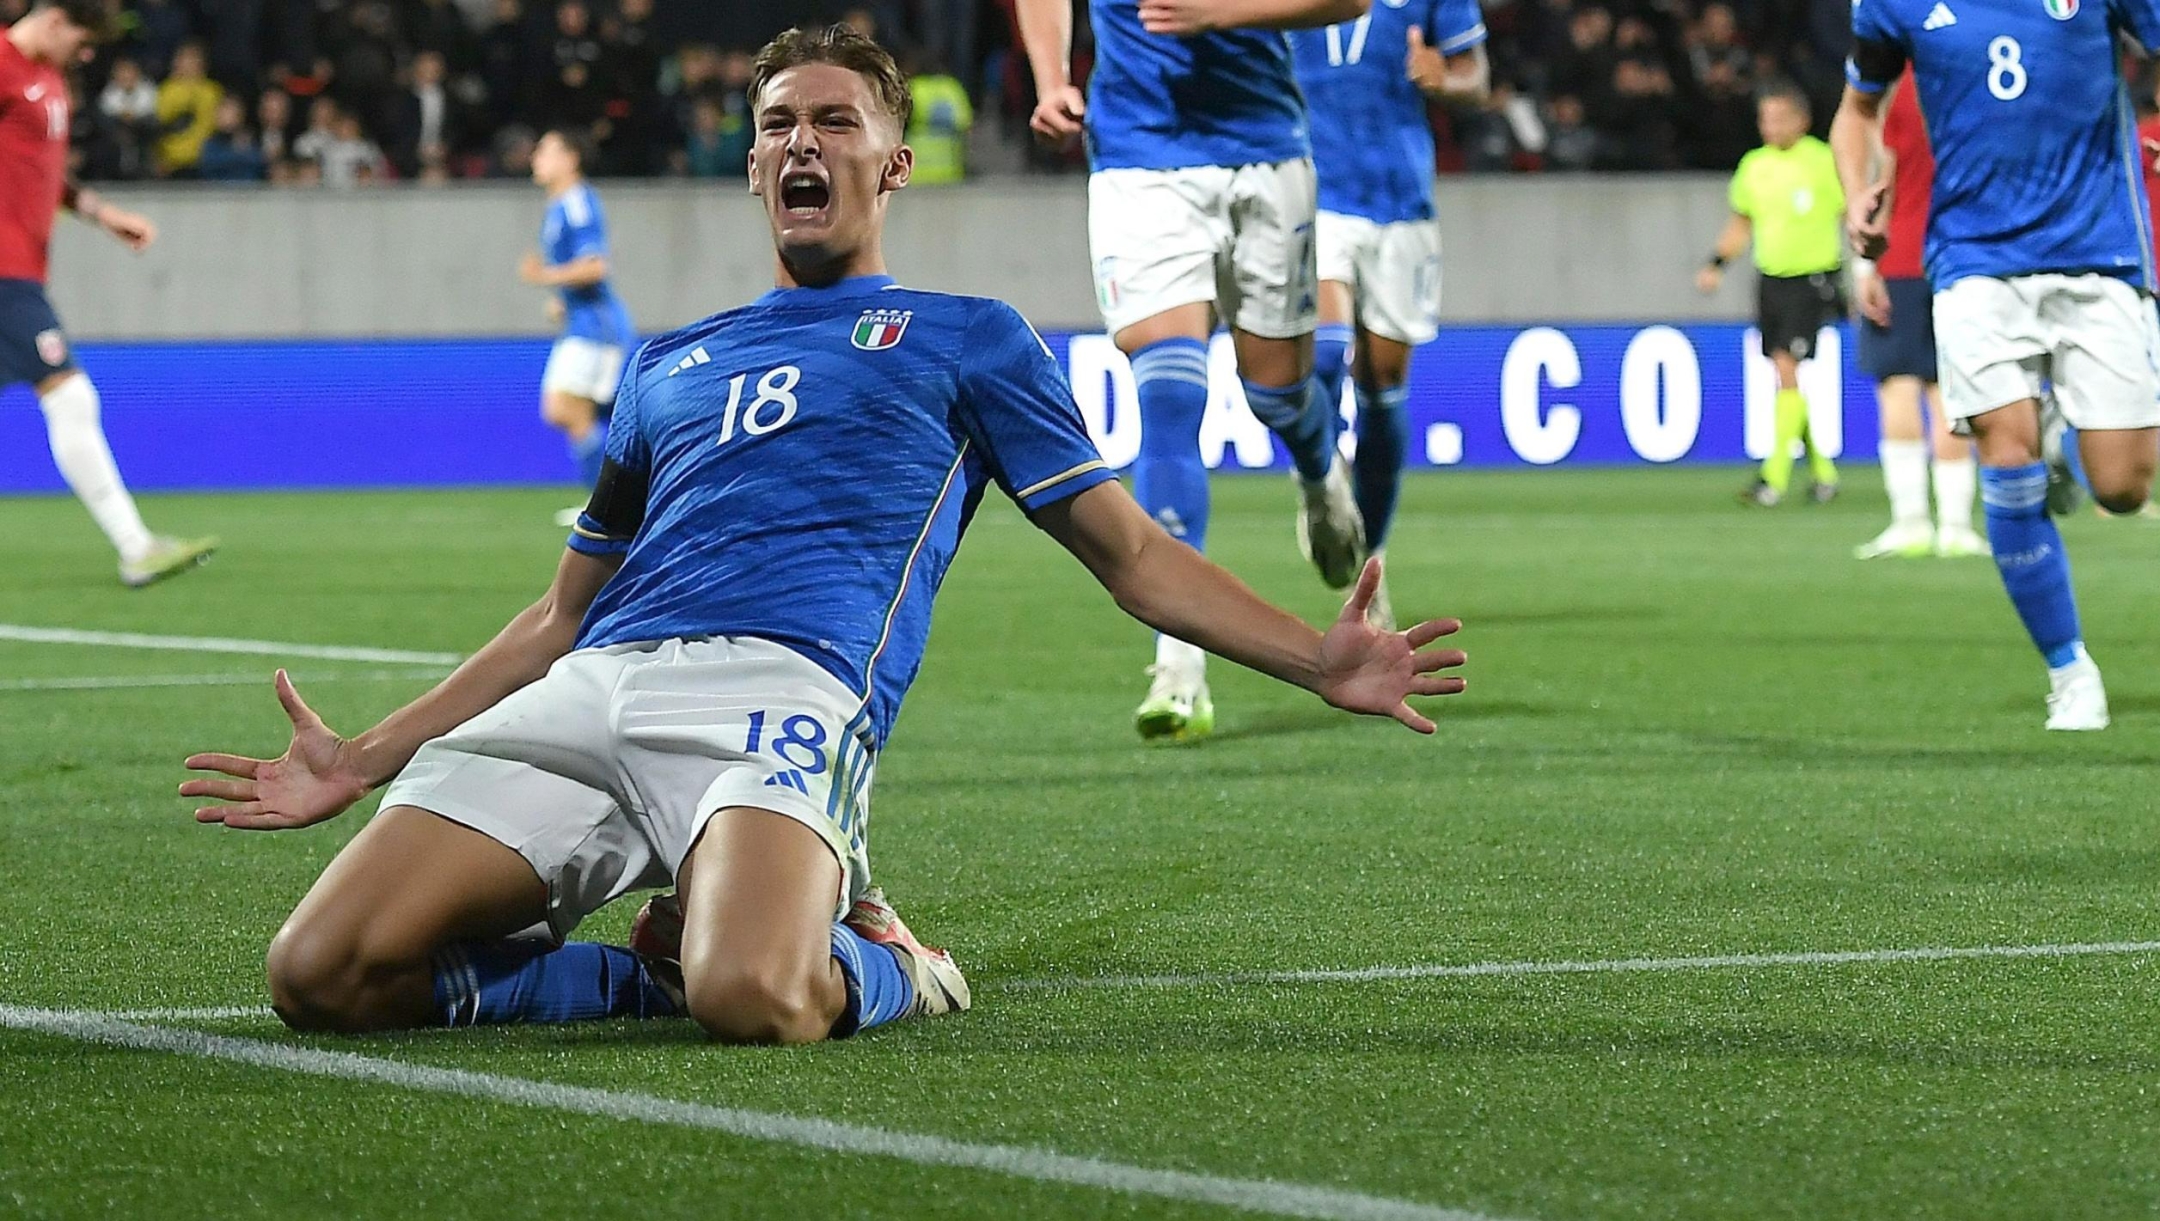 BOLZEN, ITALY - OCTOBER 17: Francesco Pio Esposito of Italy celebrates after scoring his team's second goal during the UEFA U21 EURO Qualifier match between Italy and Norway at Stadio Druso on October 17, 2023 in Bolzen, Italy. (Photo by Alessandro Sabattini/Getty Images)